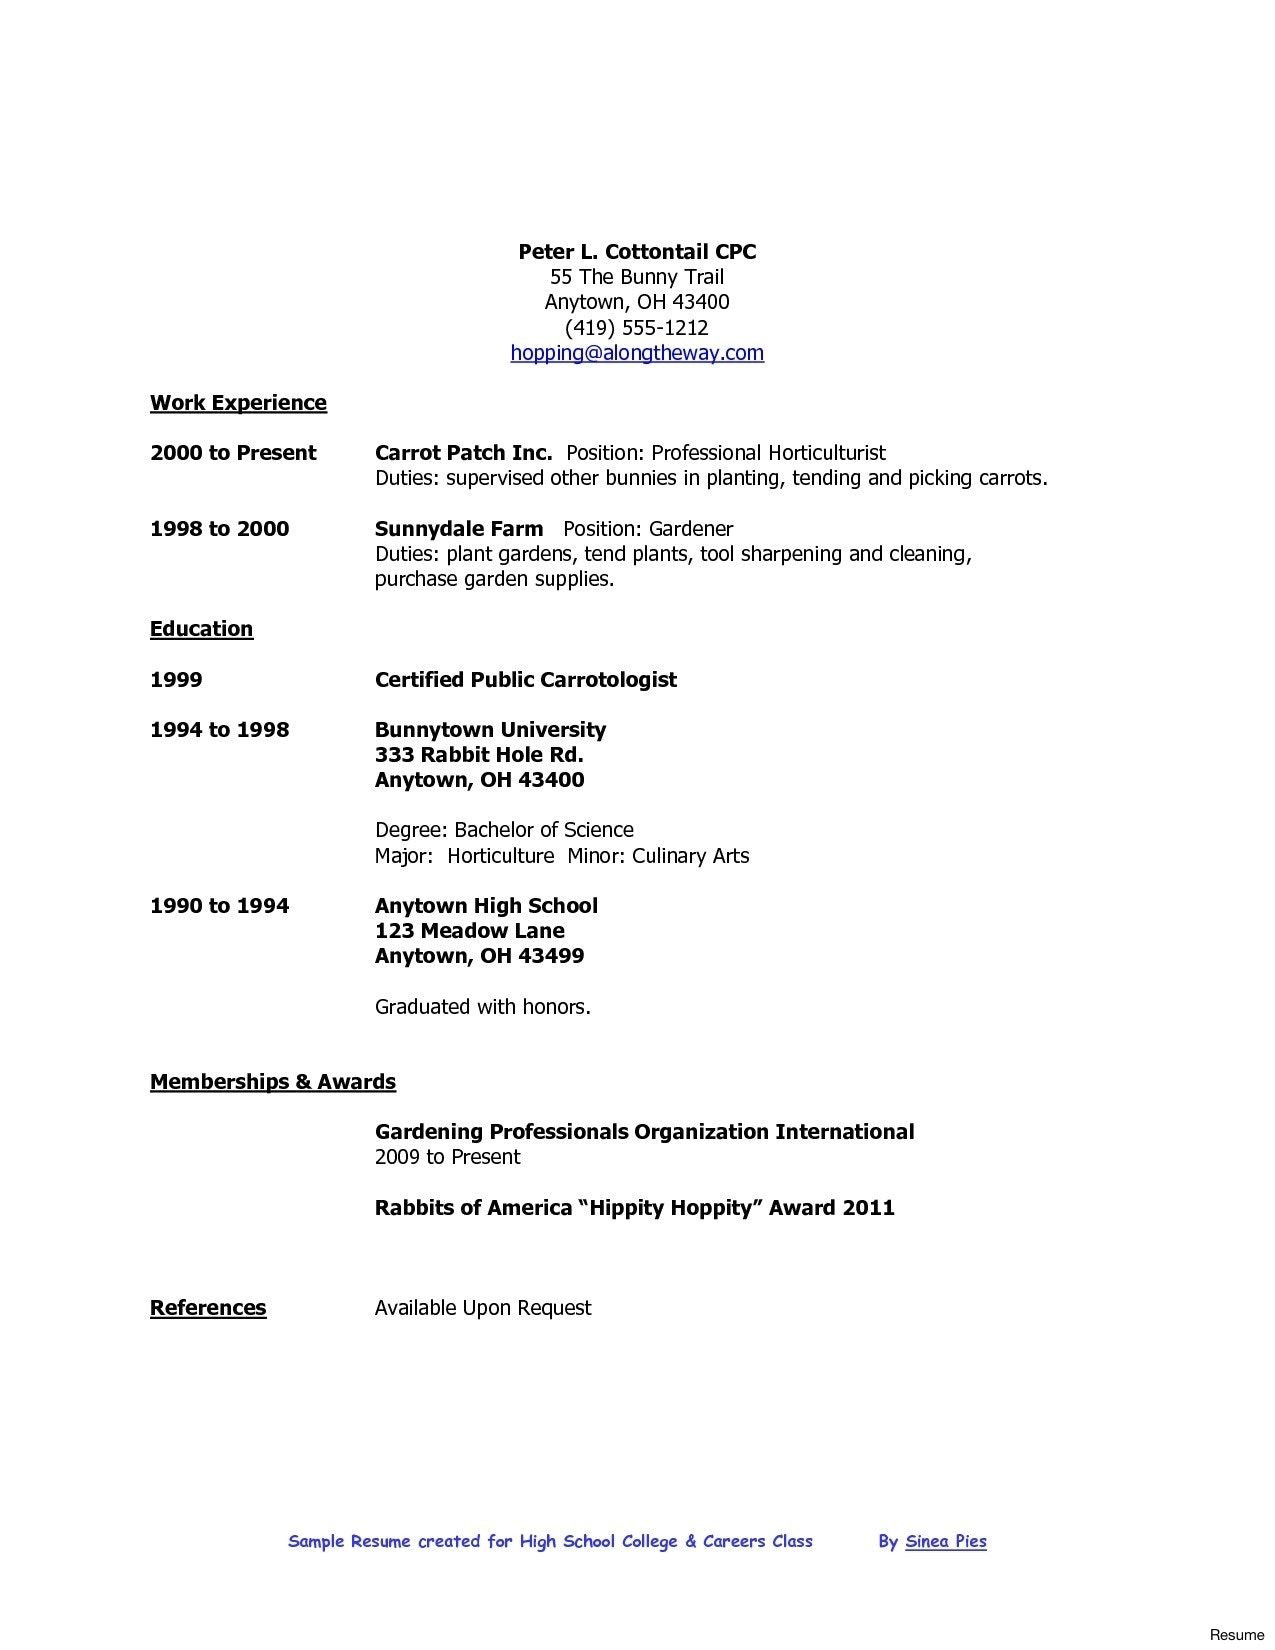 Resume Sample for High School Graduate with No Work Experience Resume format High School Graduate , #format #graduate #resume …